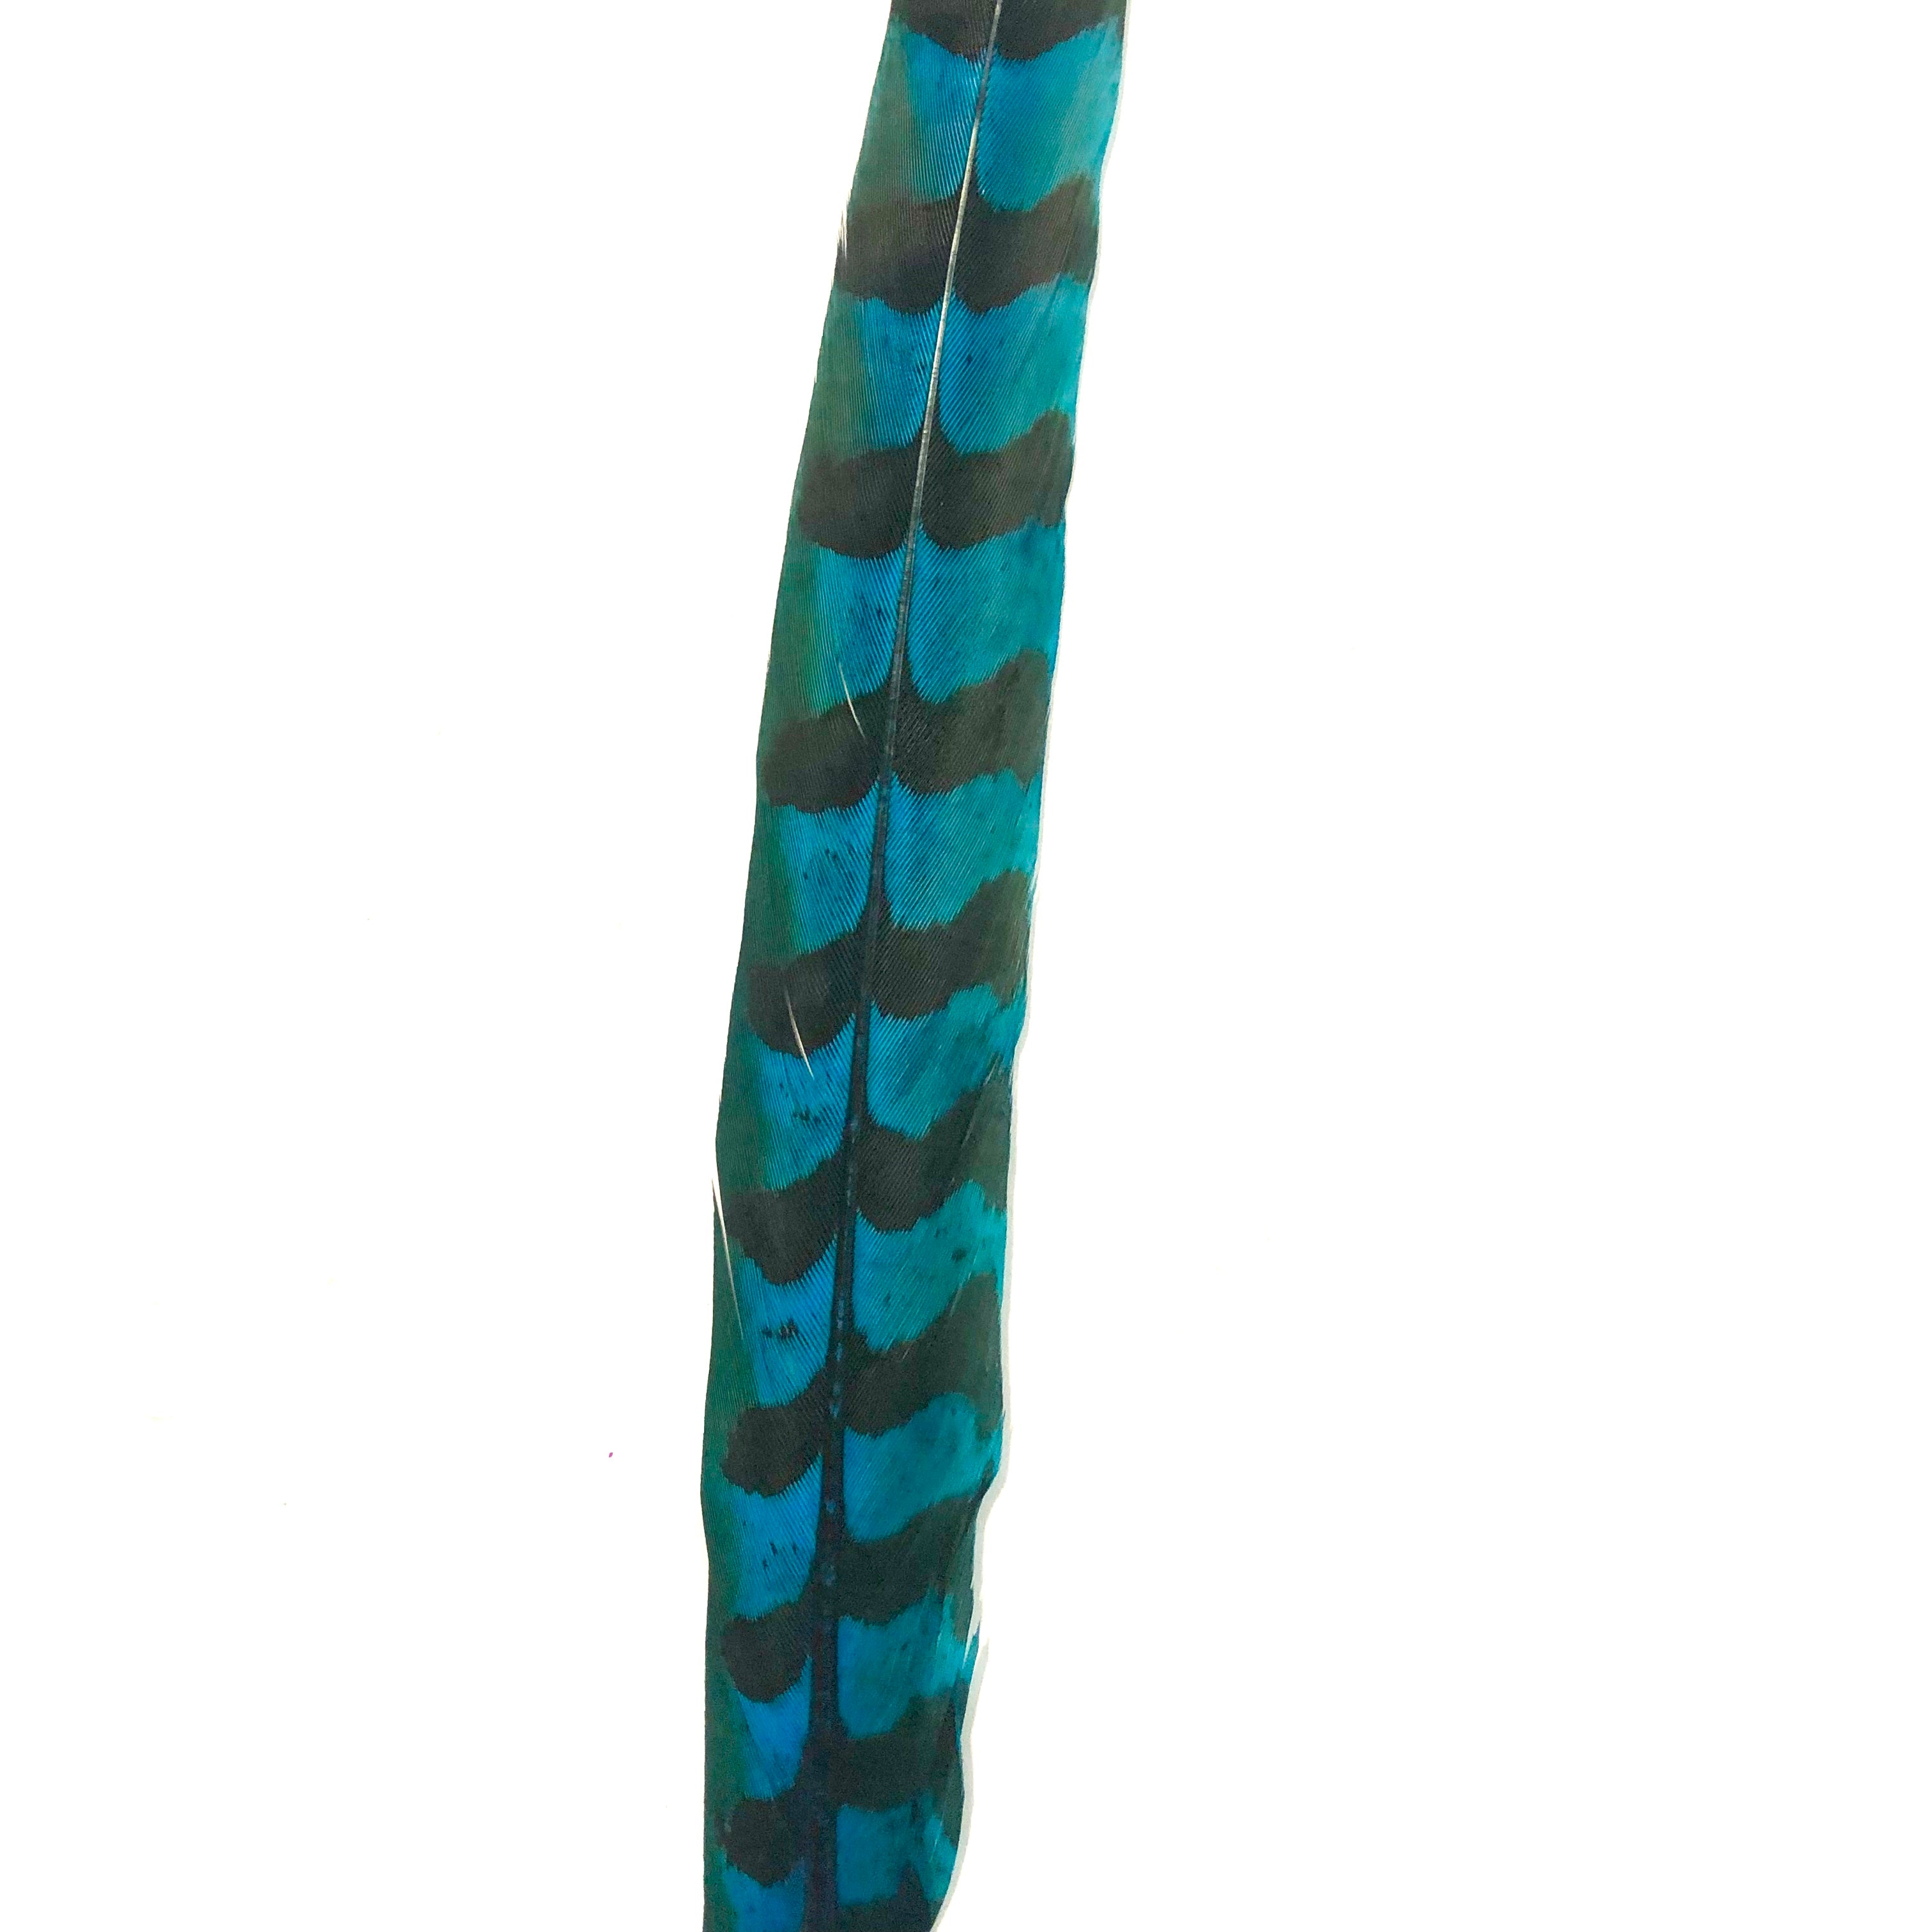 8" to 10" Reeves Pheasant Tail Feather - Turquoise